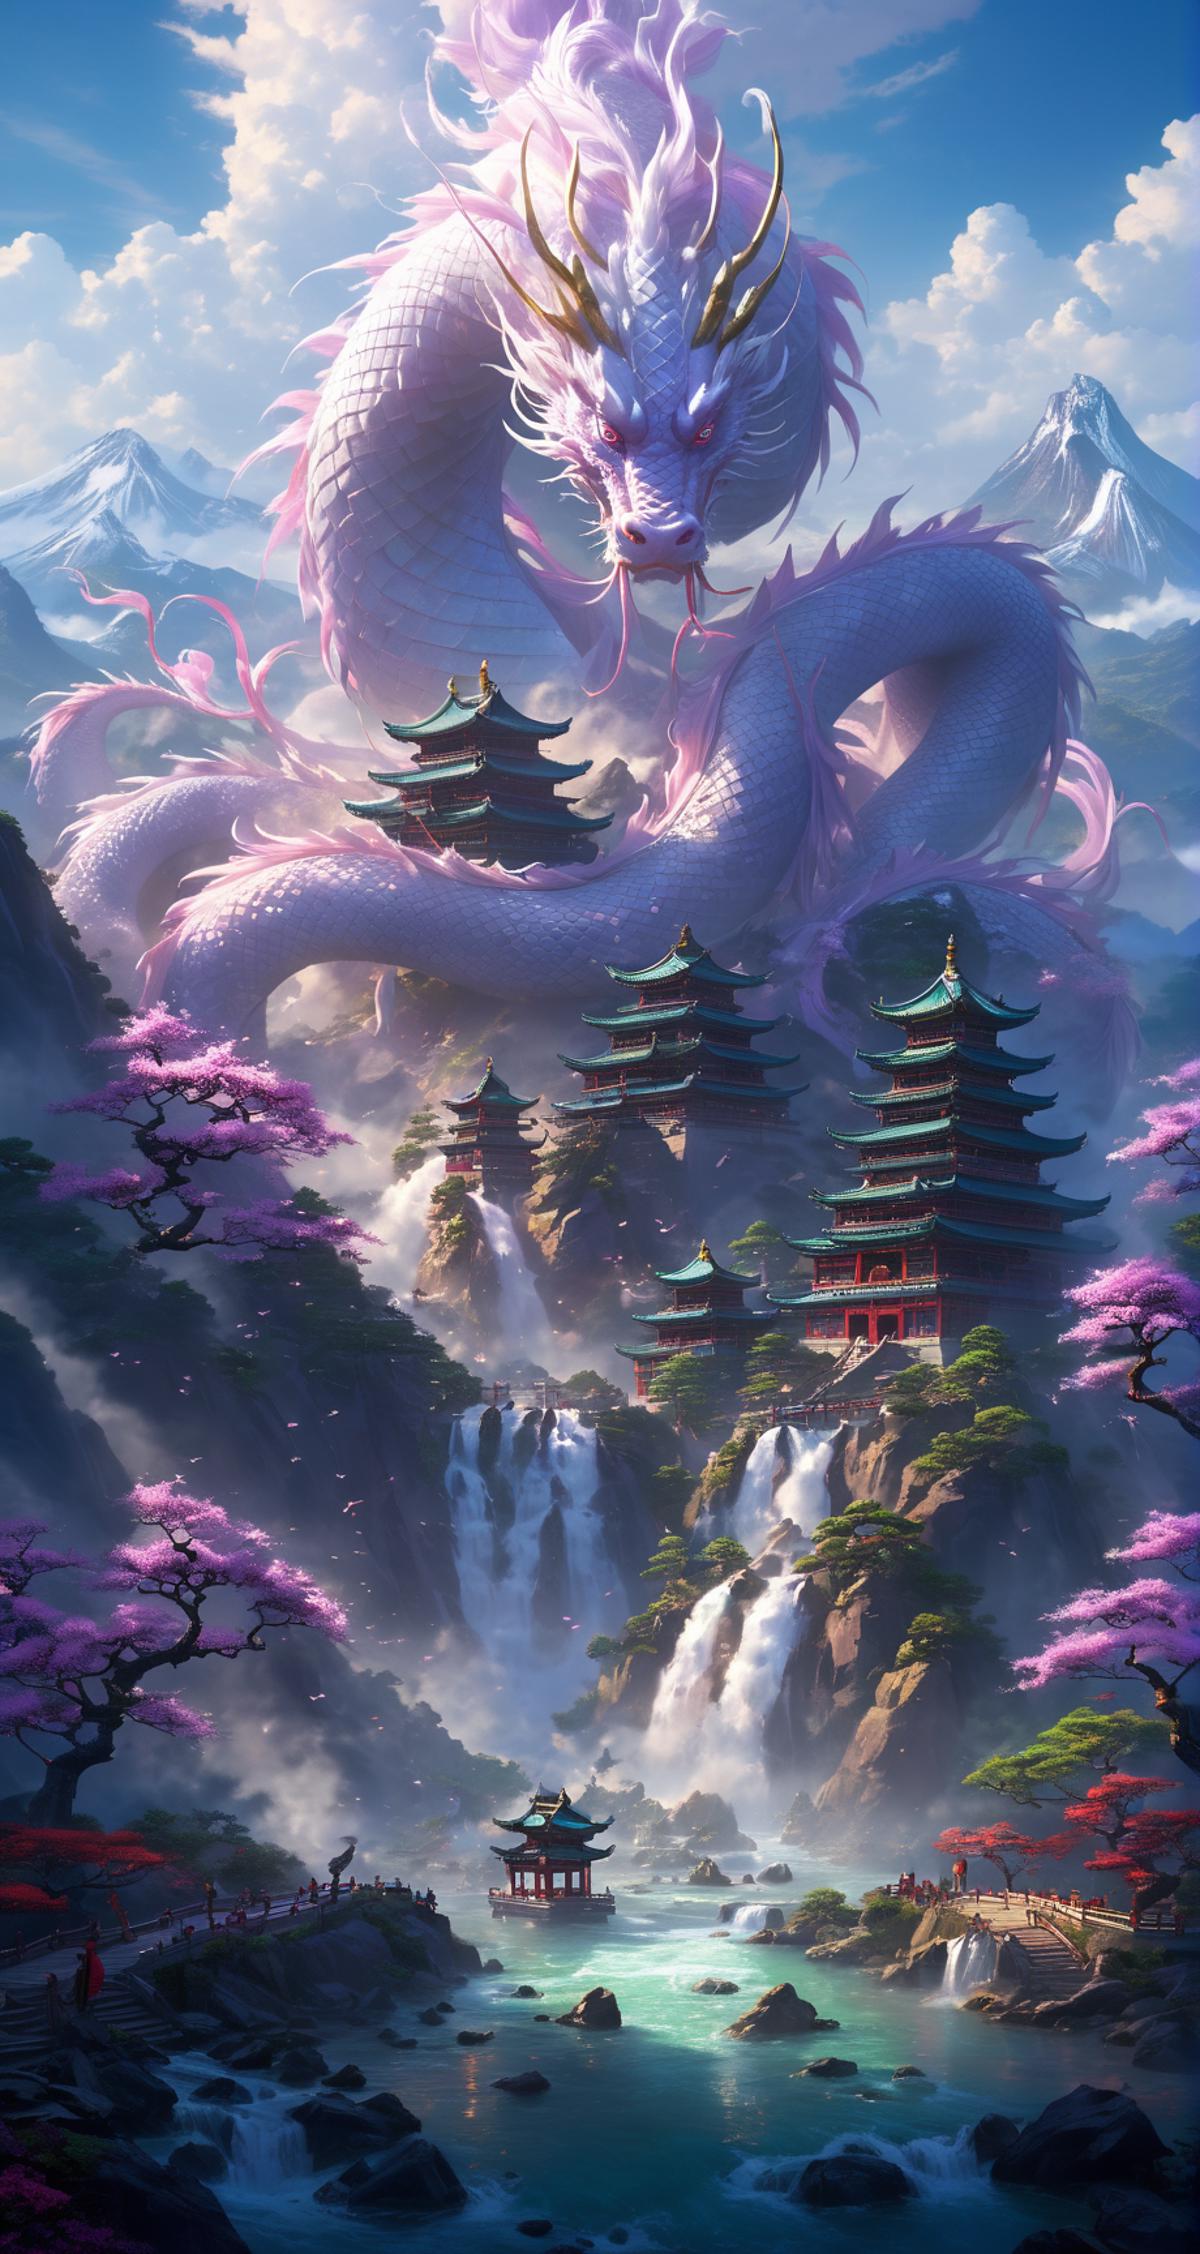 A painting of a dragon with a pink and white body, surrounded by towers and waterfalls.